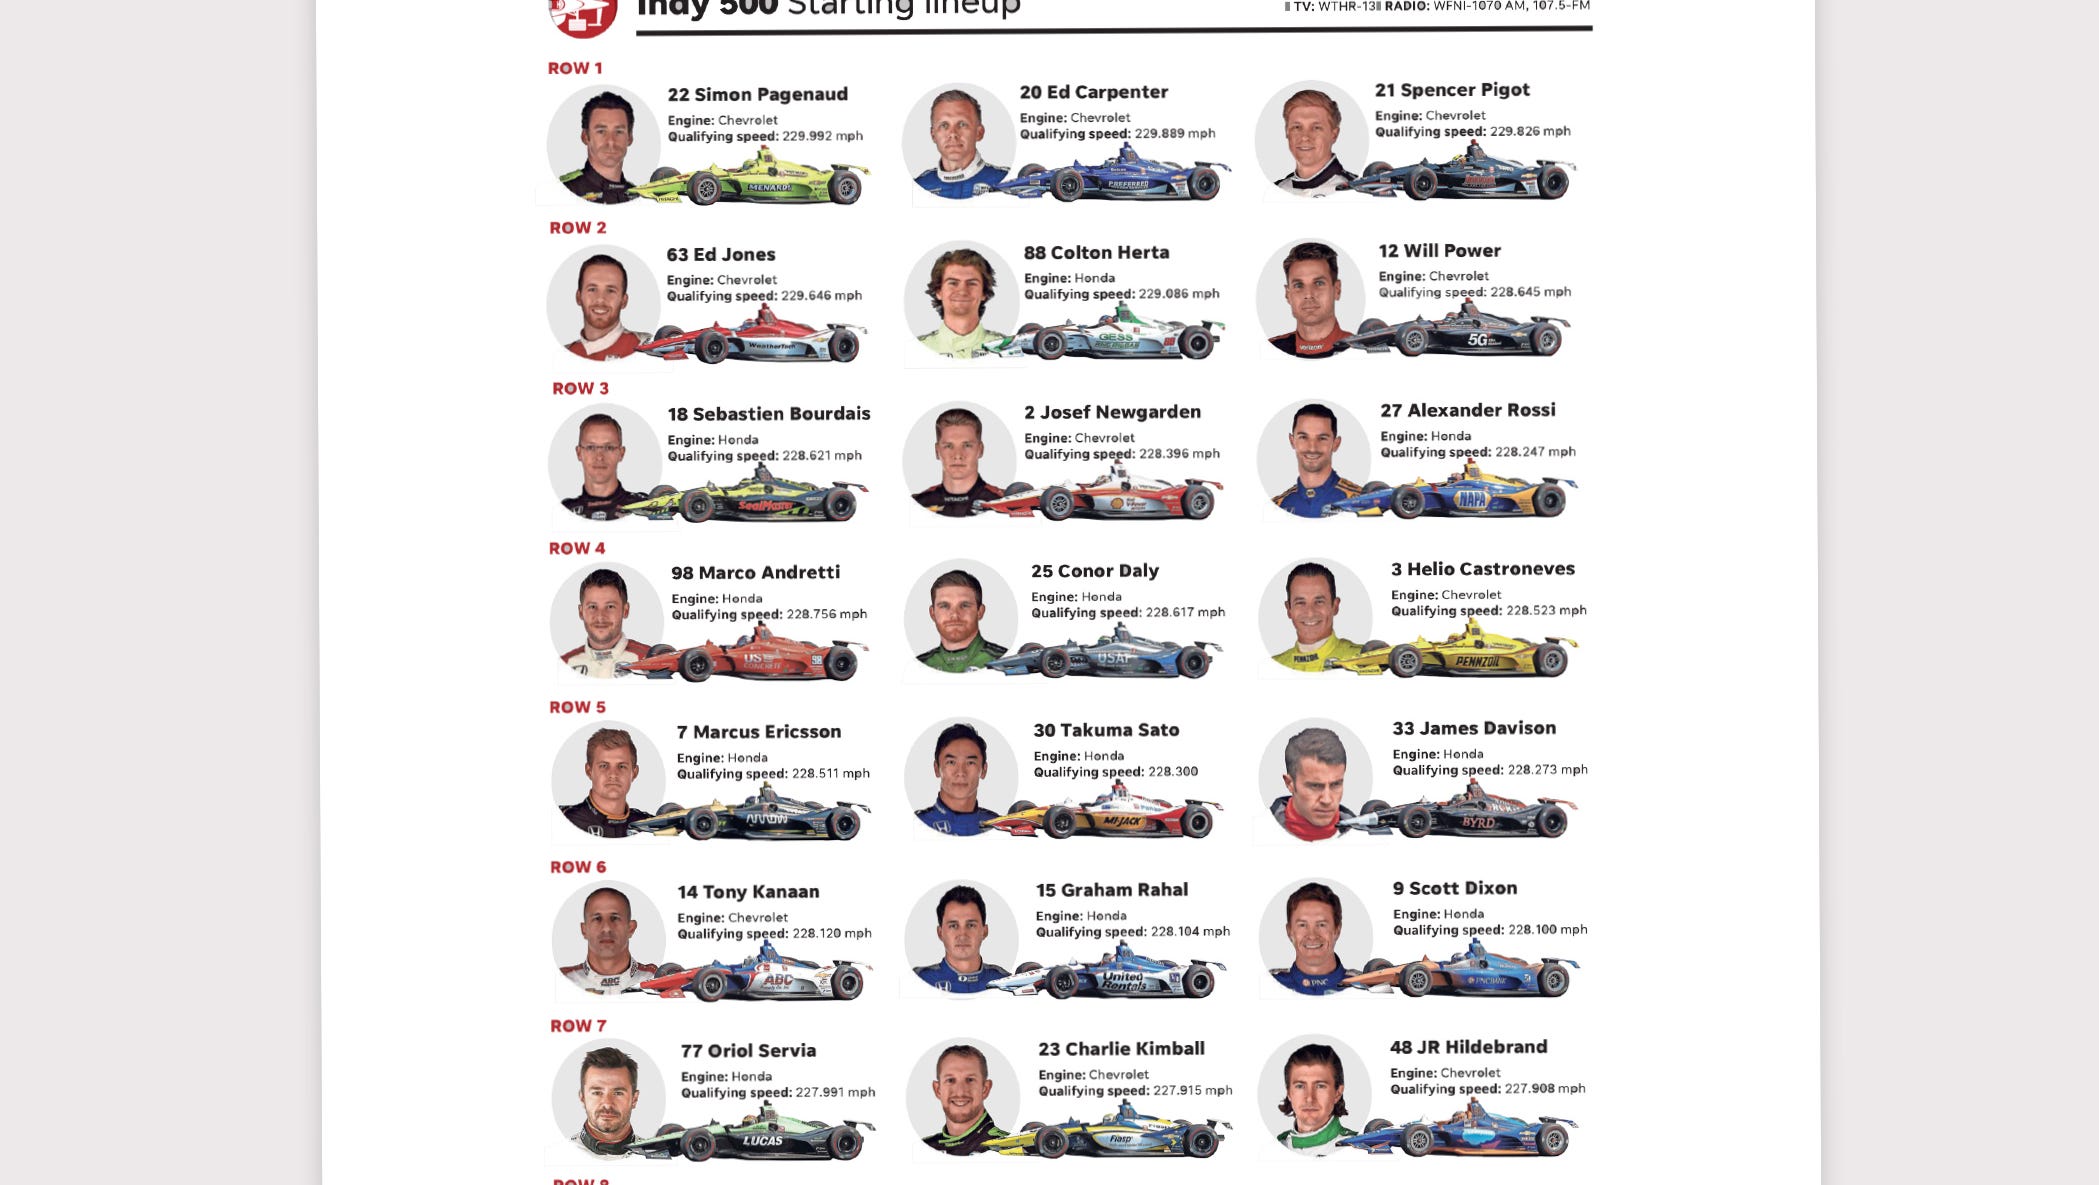 Indy 500 lineup: Printable starting grid for the 2019 race